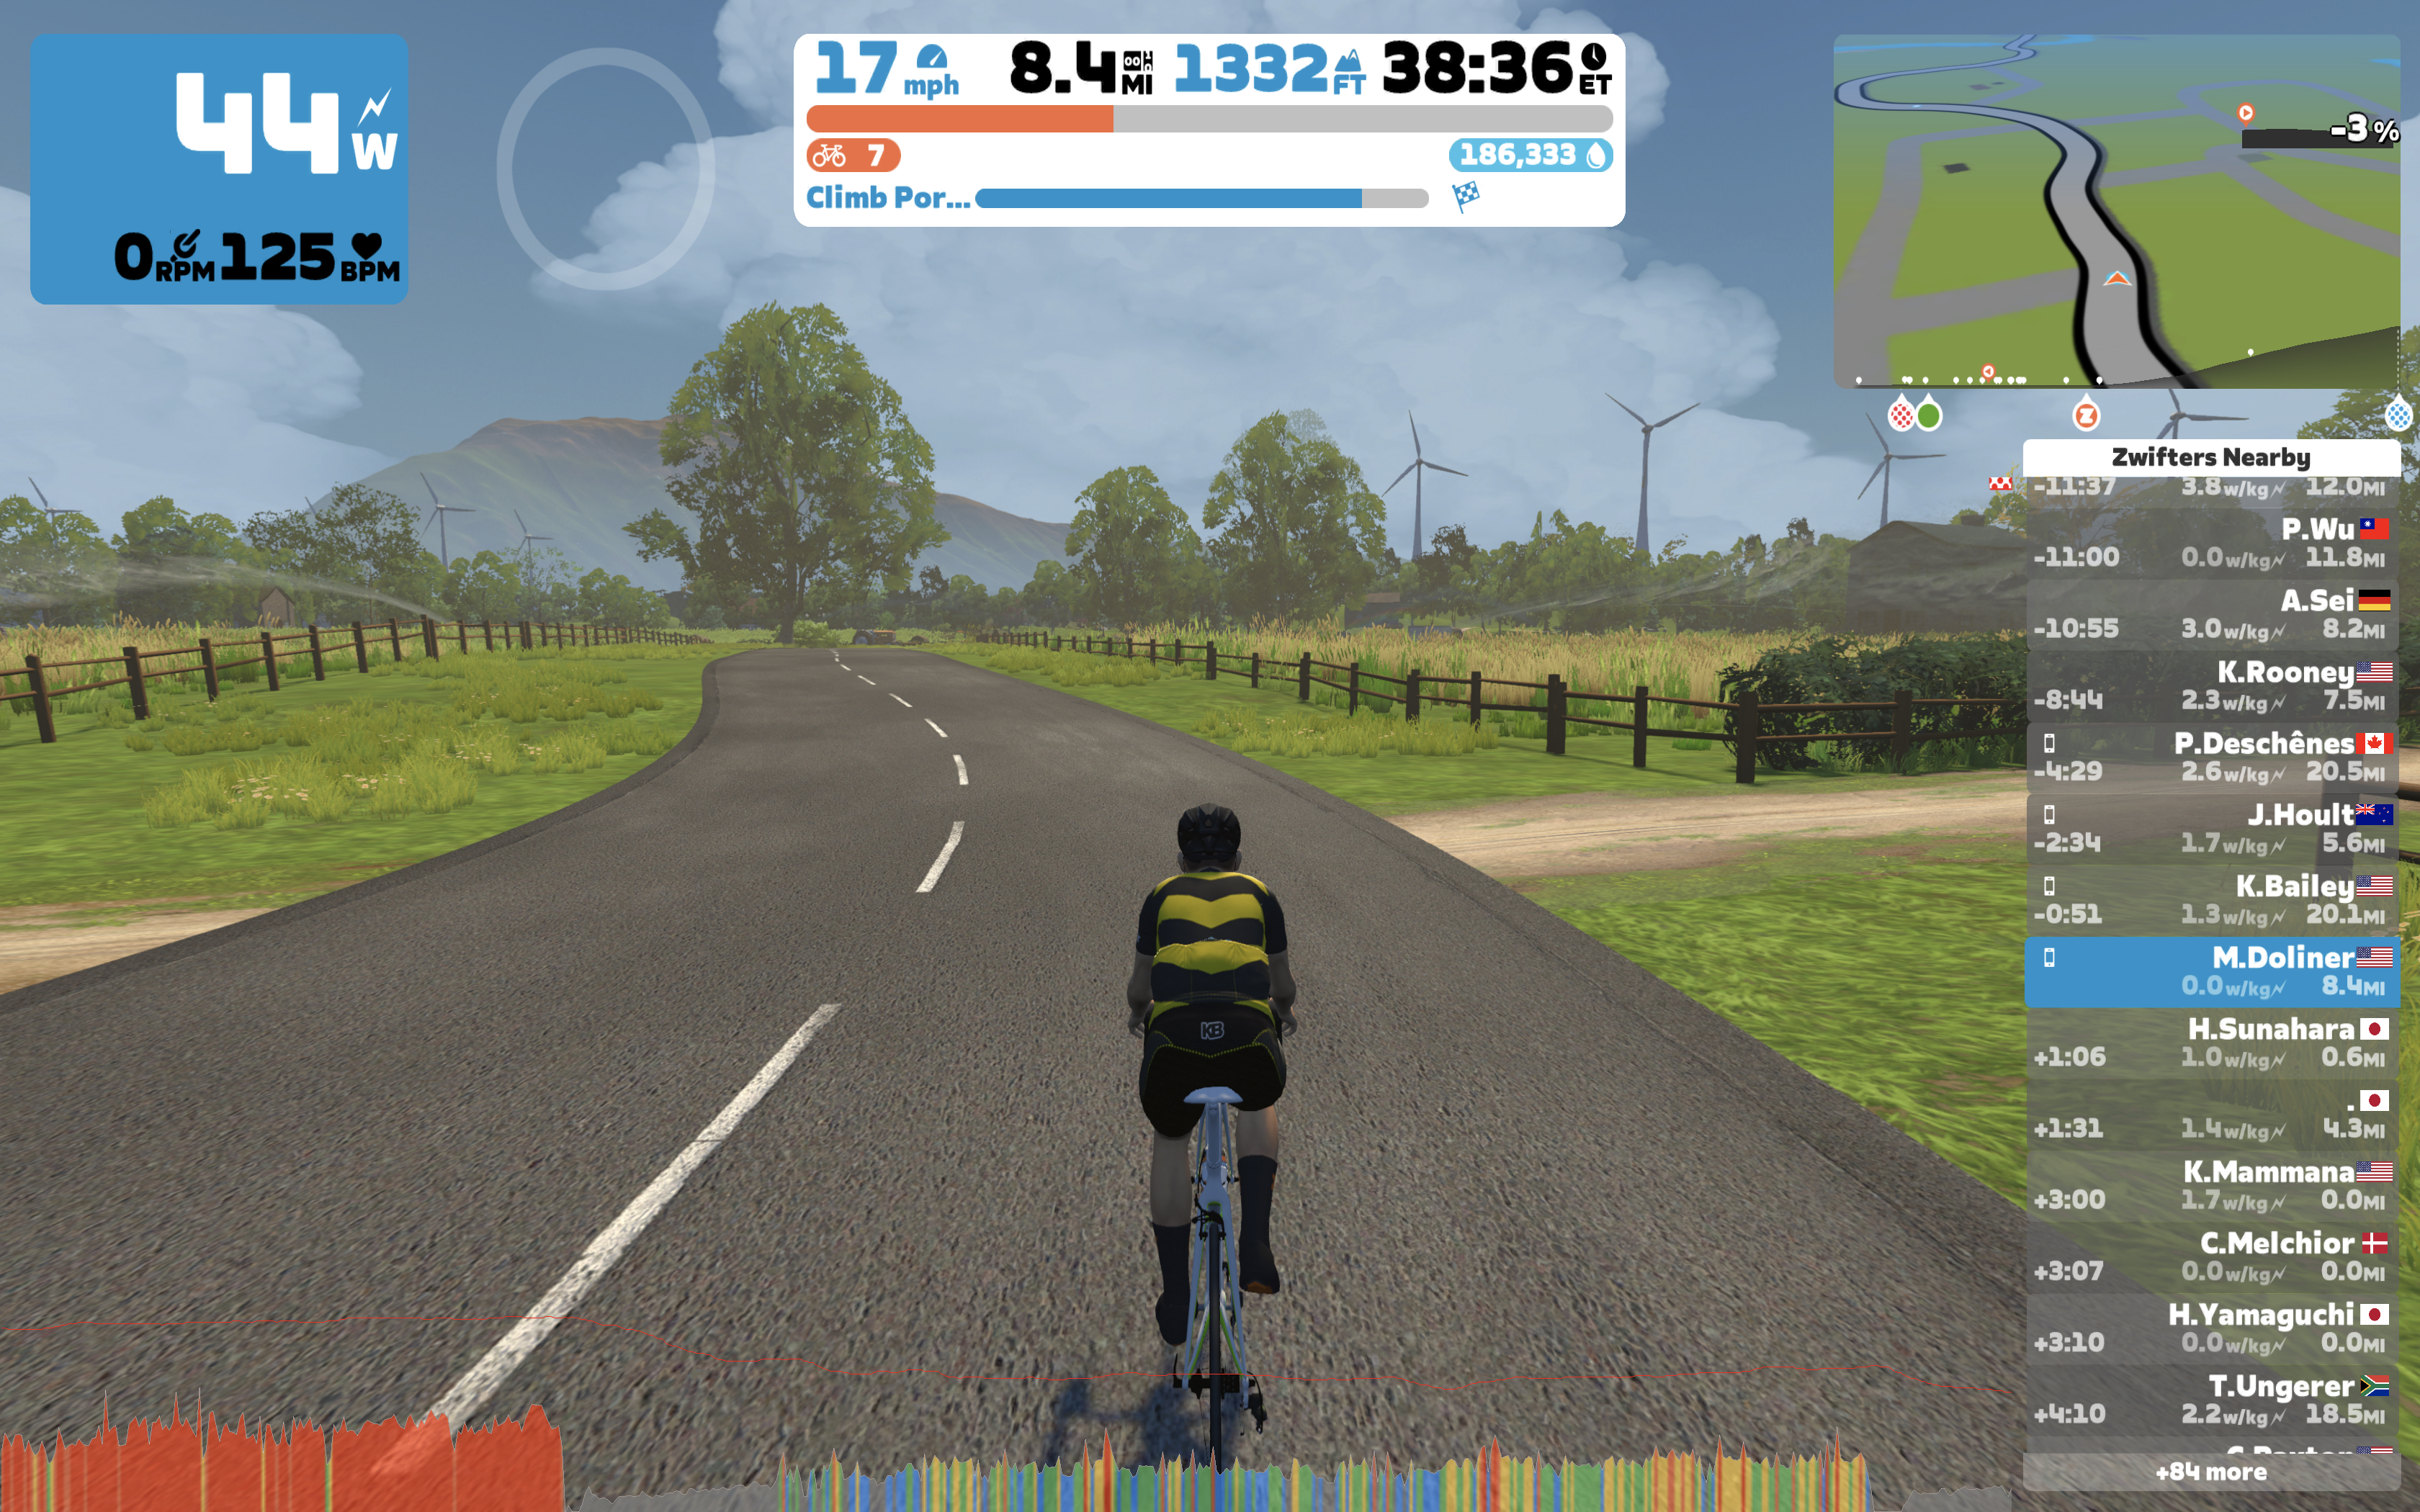 Screenshot of the Zwift Mac application, showing rendered graphics of a cyclist riding on a road with rendered scenery, with power, heart rate, and time stats at the top.